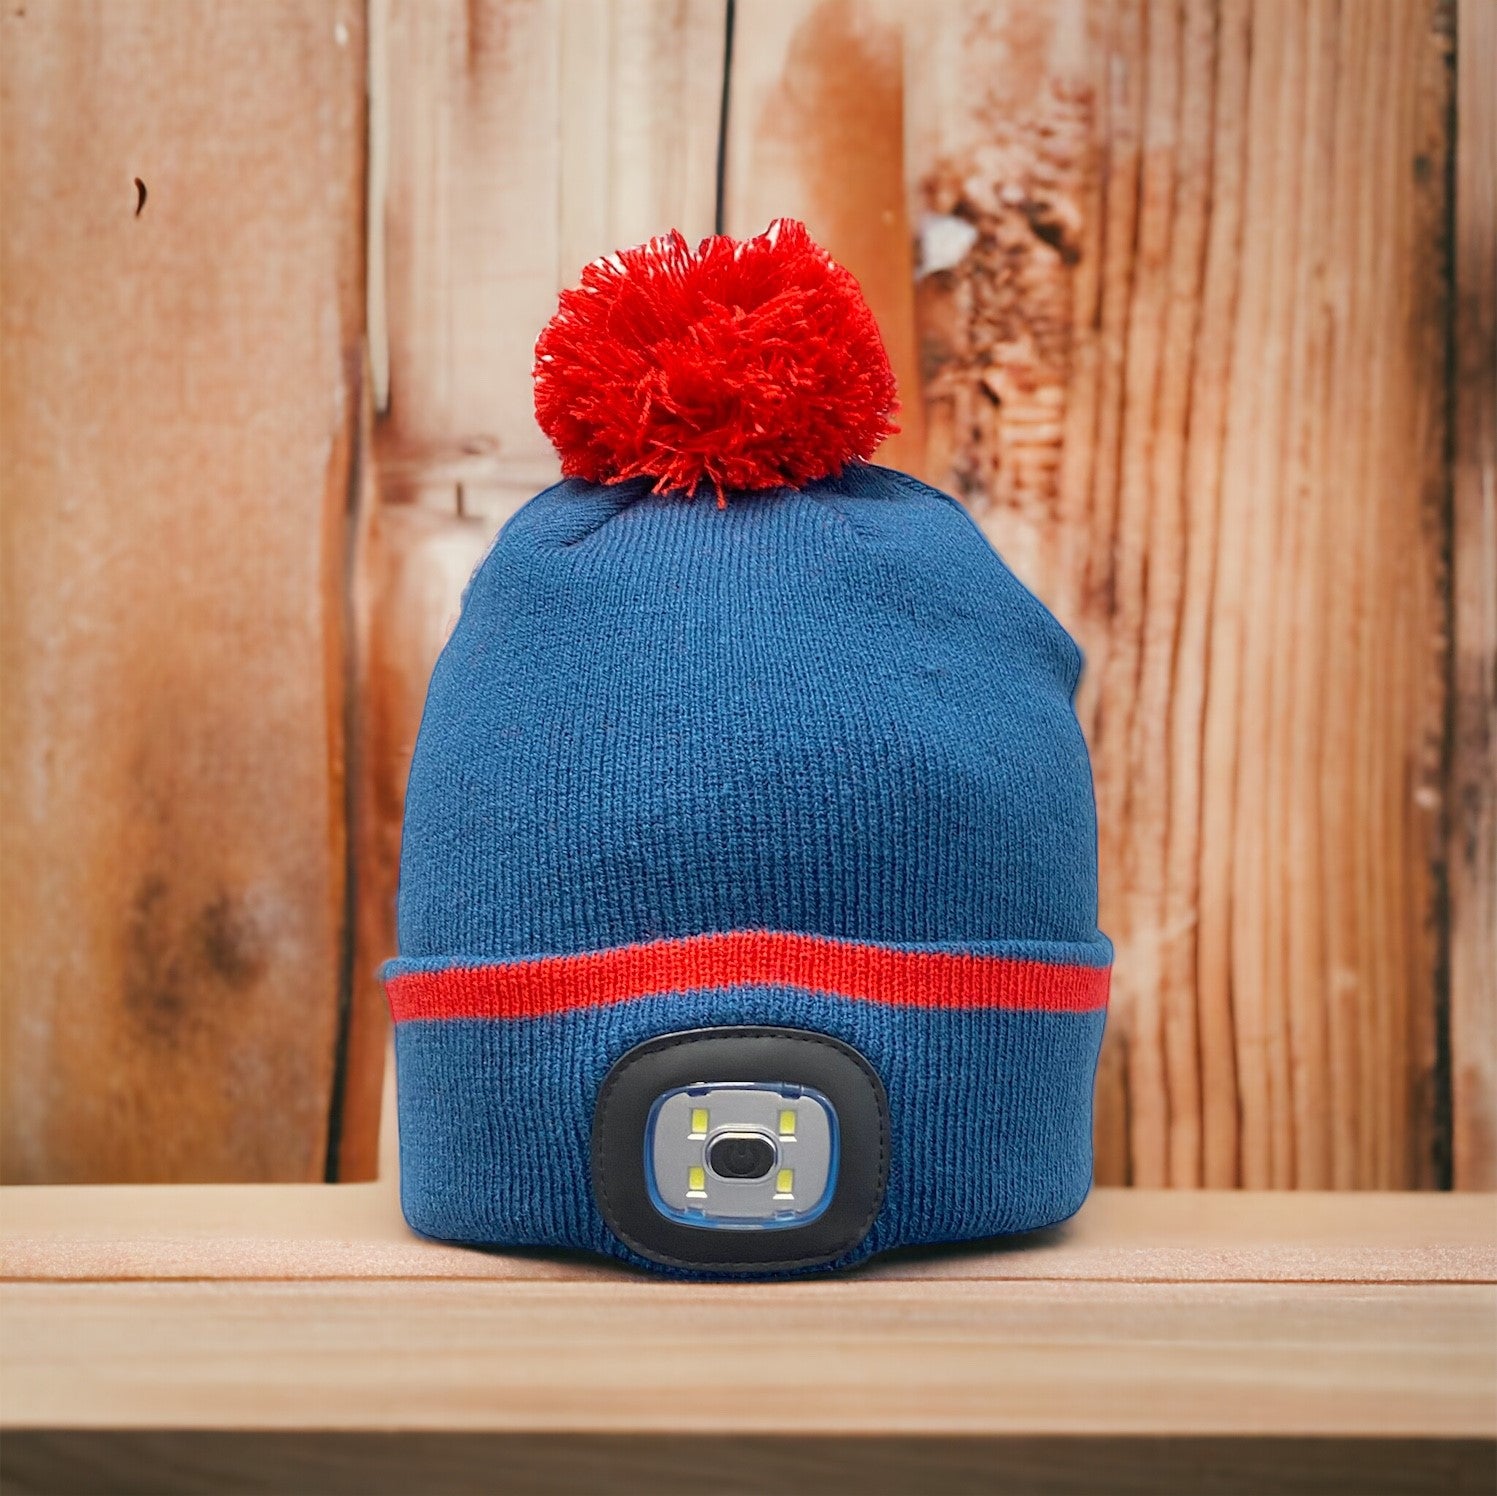 Bobble Hat With LED Light Navy/Red